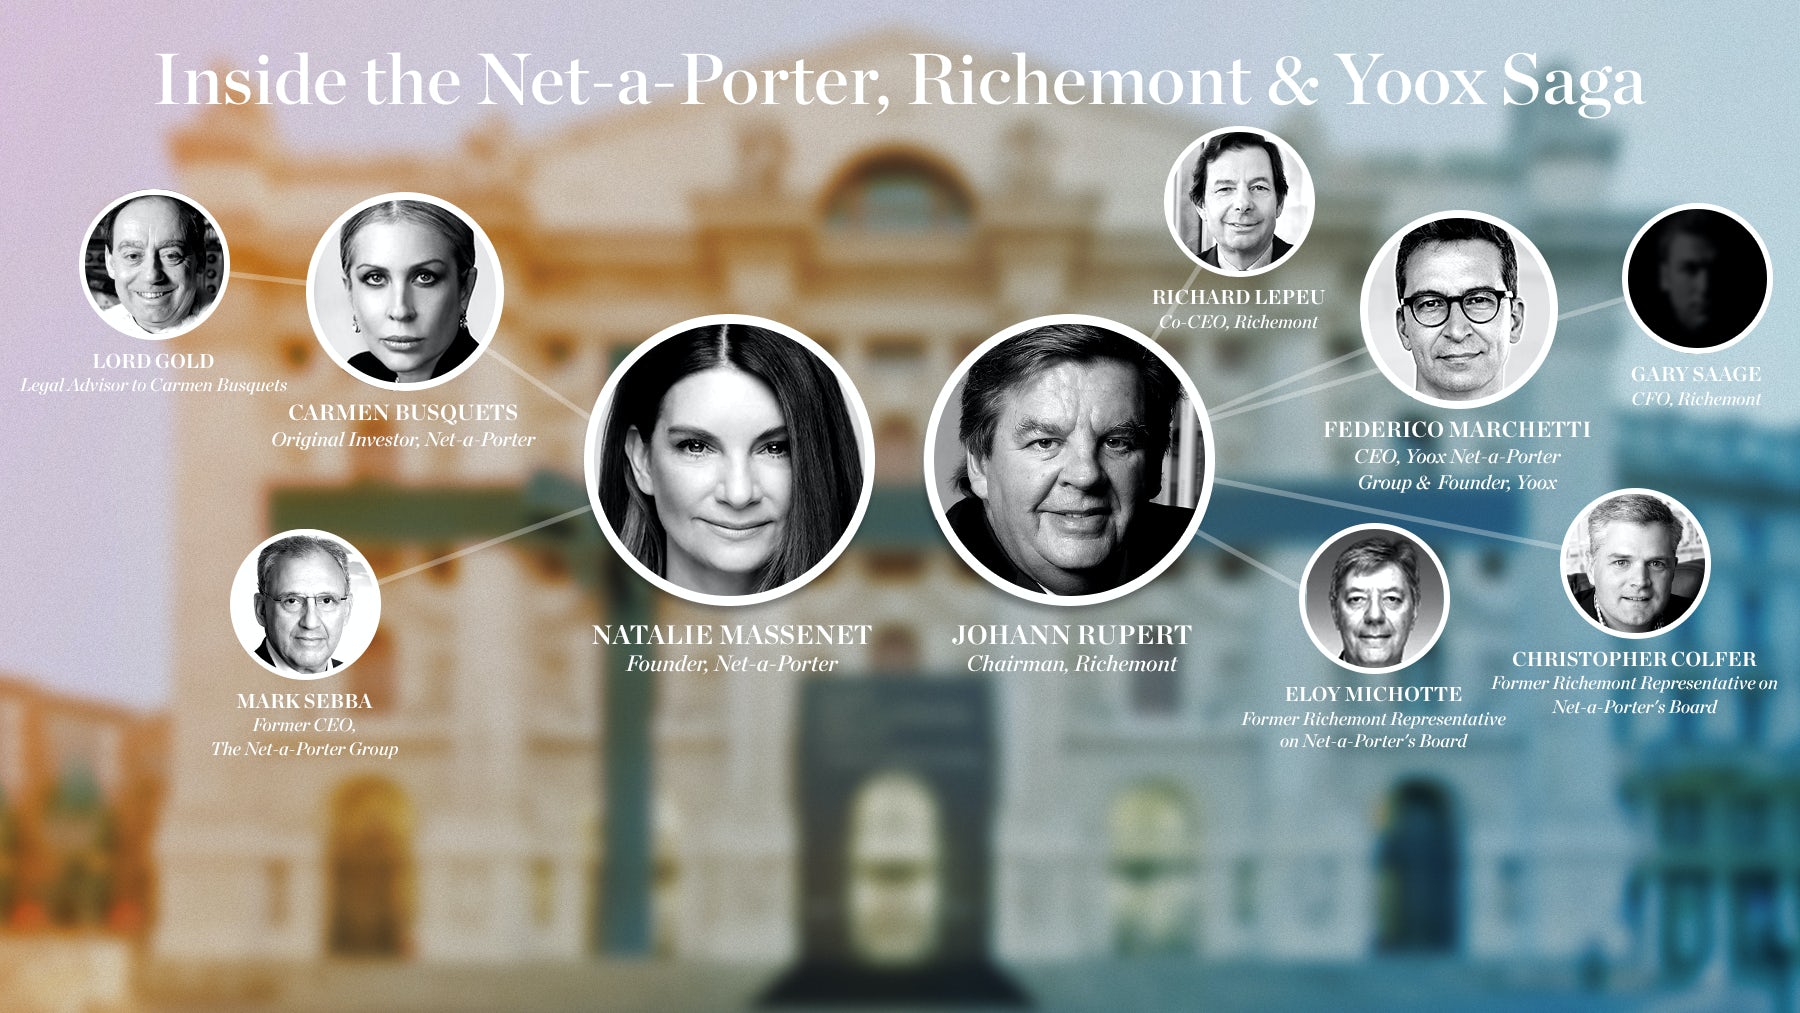 Richemont Group: Pioneering the Future of Luxury